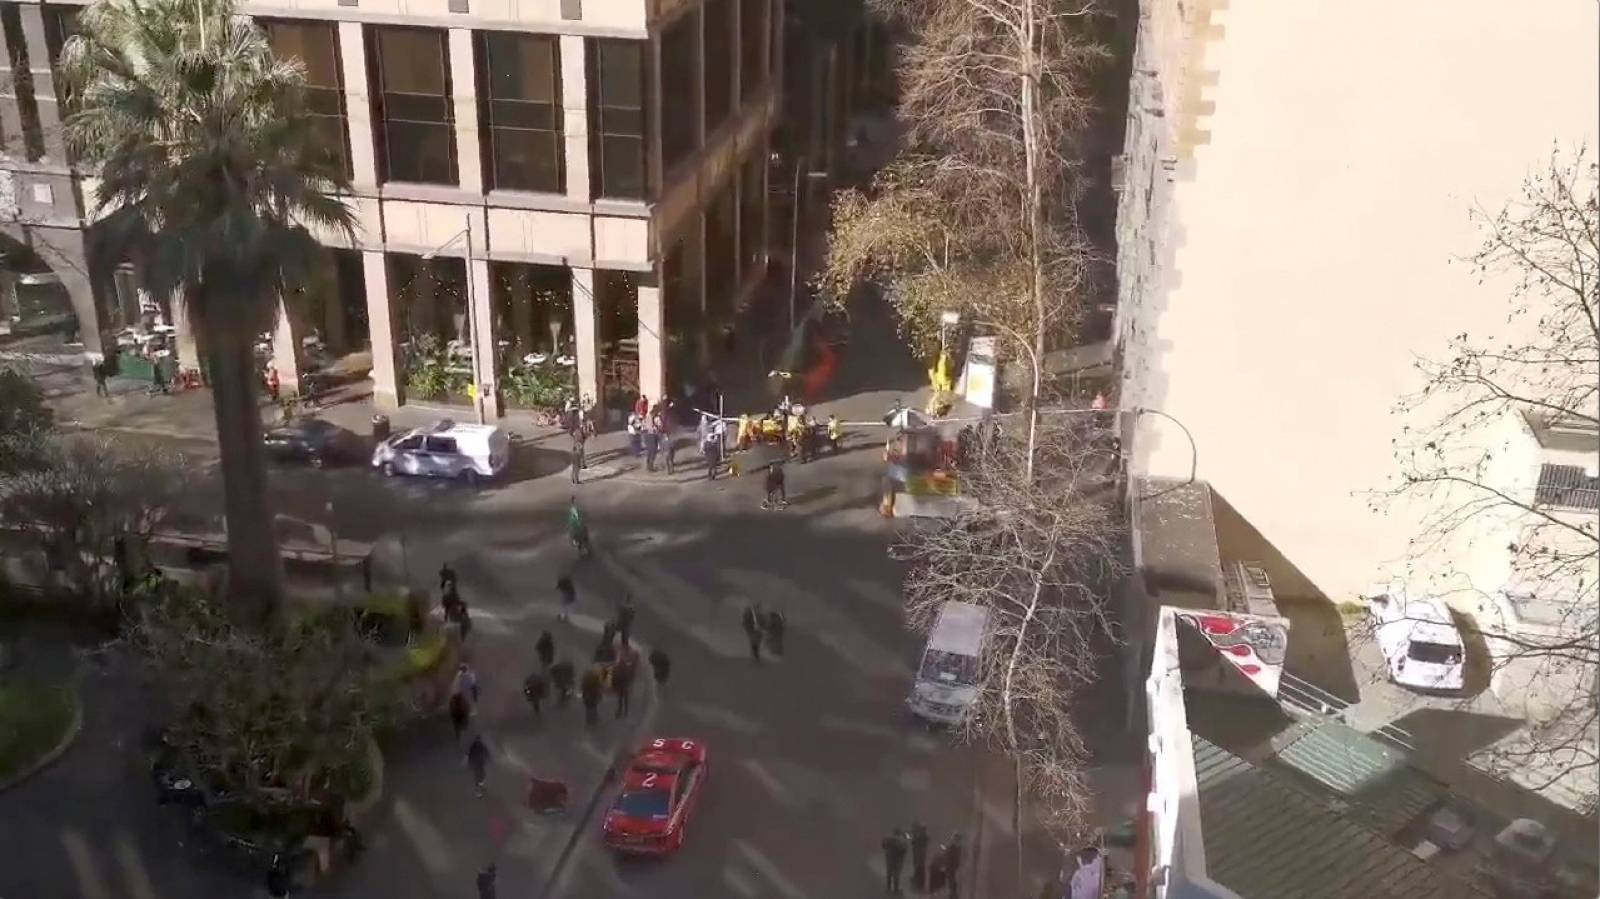 An aerial view shows security officers standing around a barricaded area in Sydney